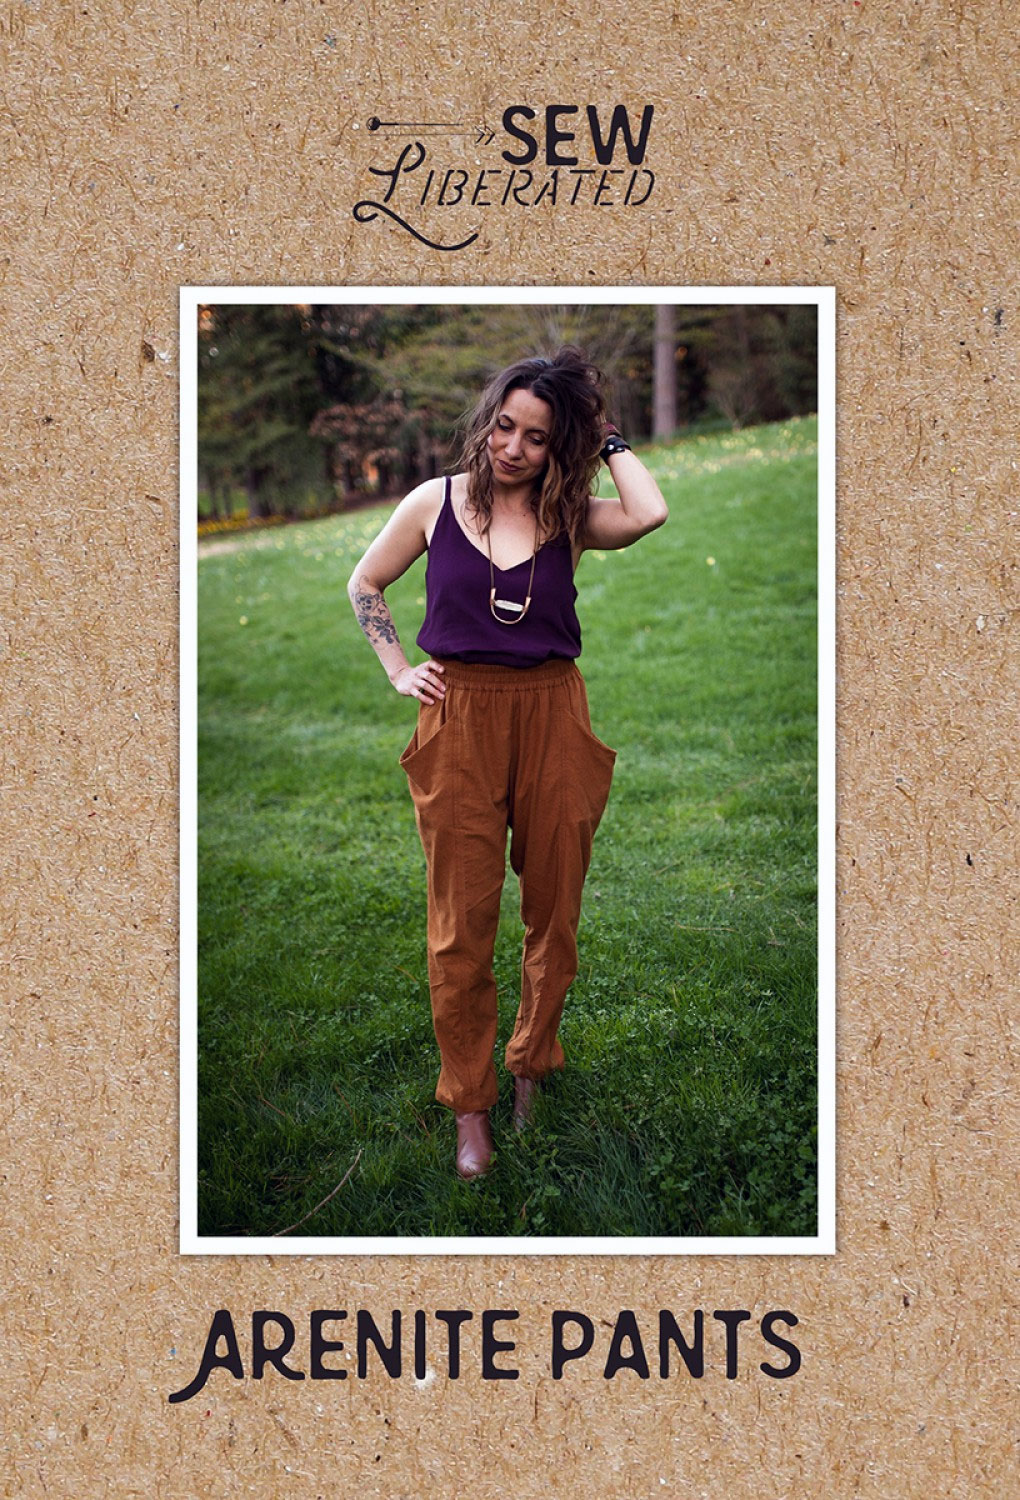 https://www.sewthankful.com/media/SewLiberated/2018/Arentie-Pants-sewing-pattern-Sew-Liberated-front.jpg